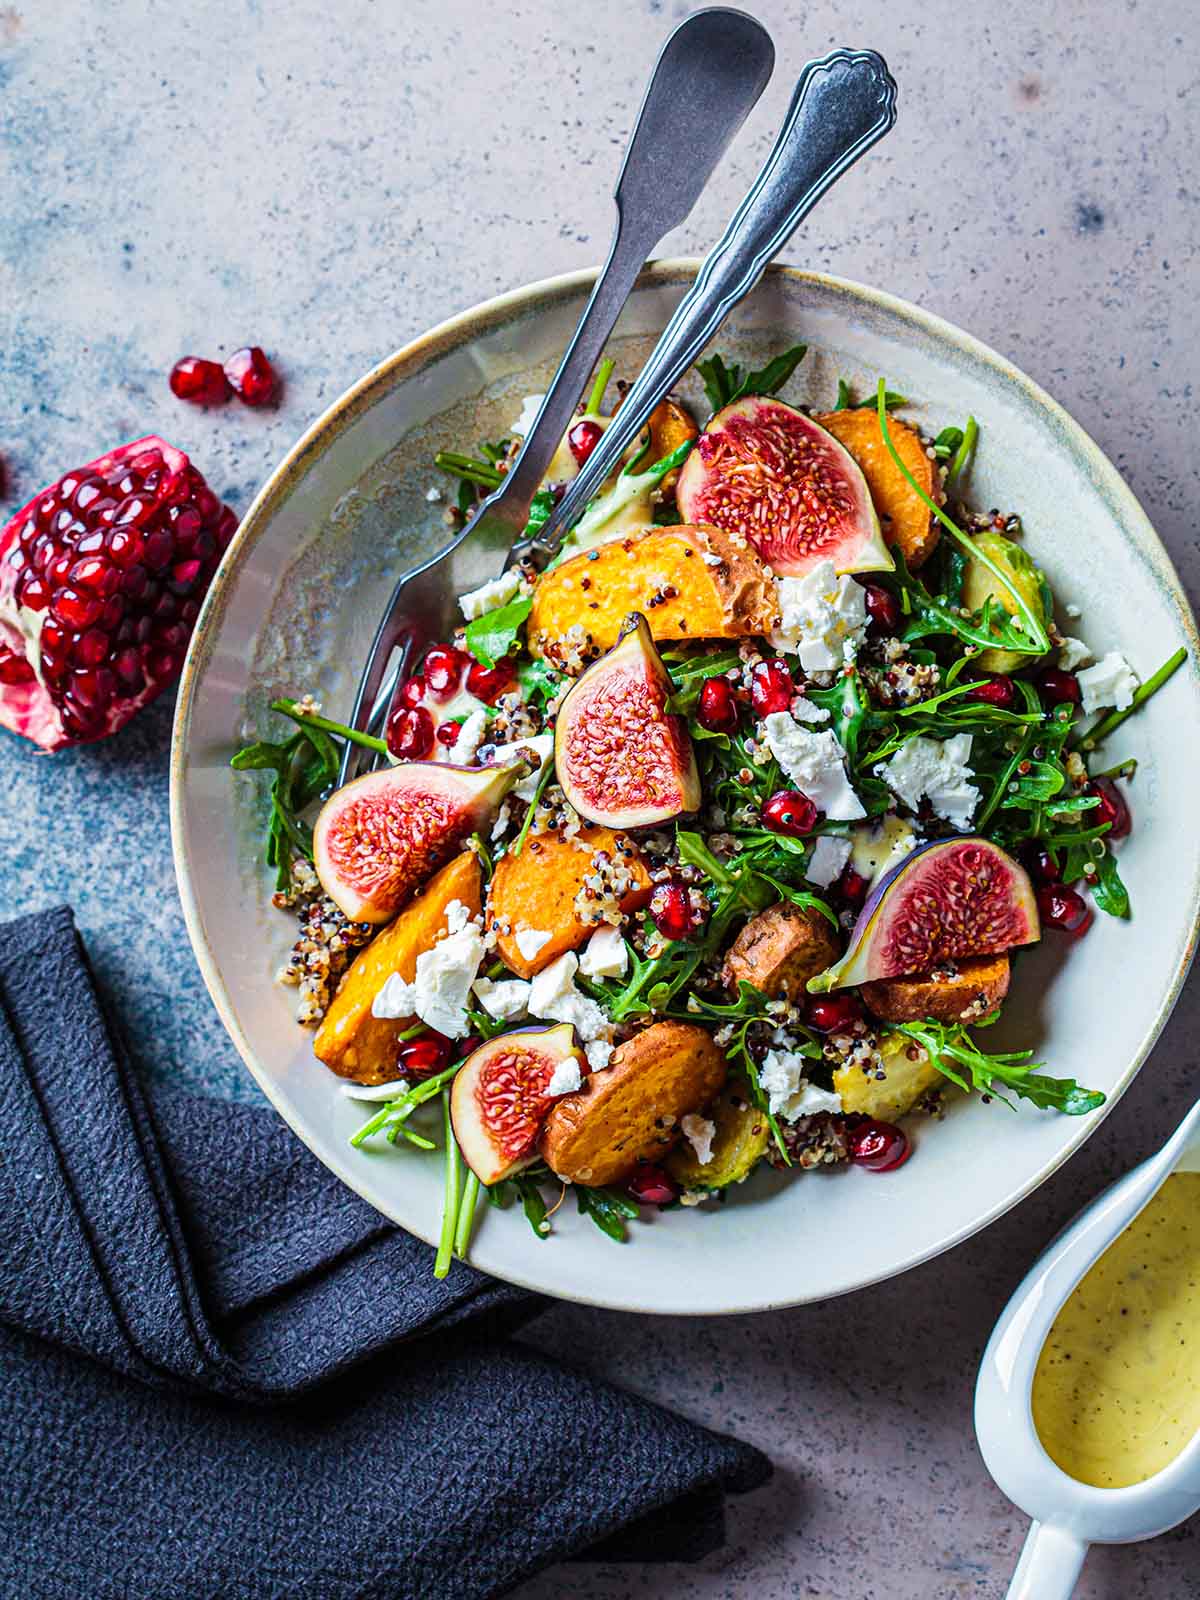 Warm autumn quinoa salad with baked vegetables (sweet potato, Brussels sprouts), figs, feta cheese and pomegranate, top view.